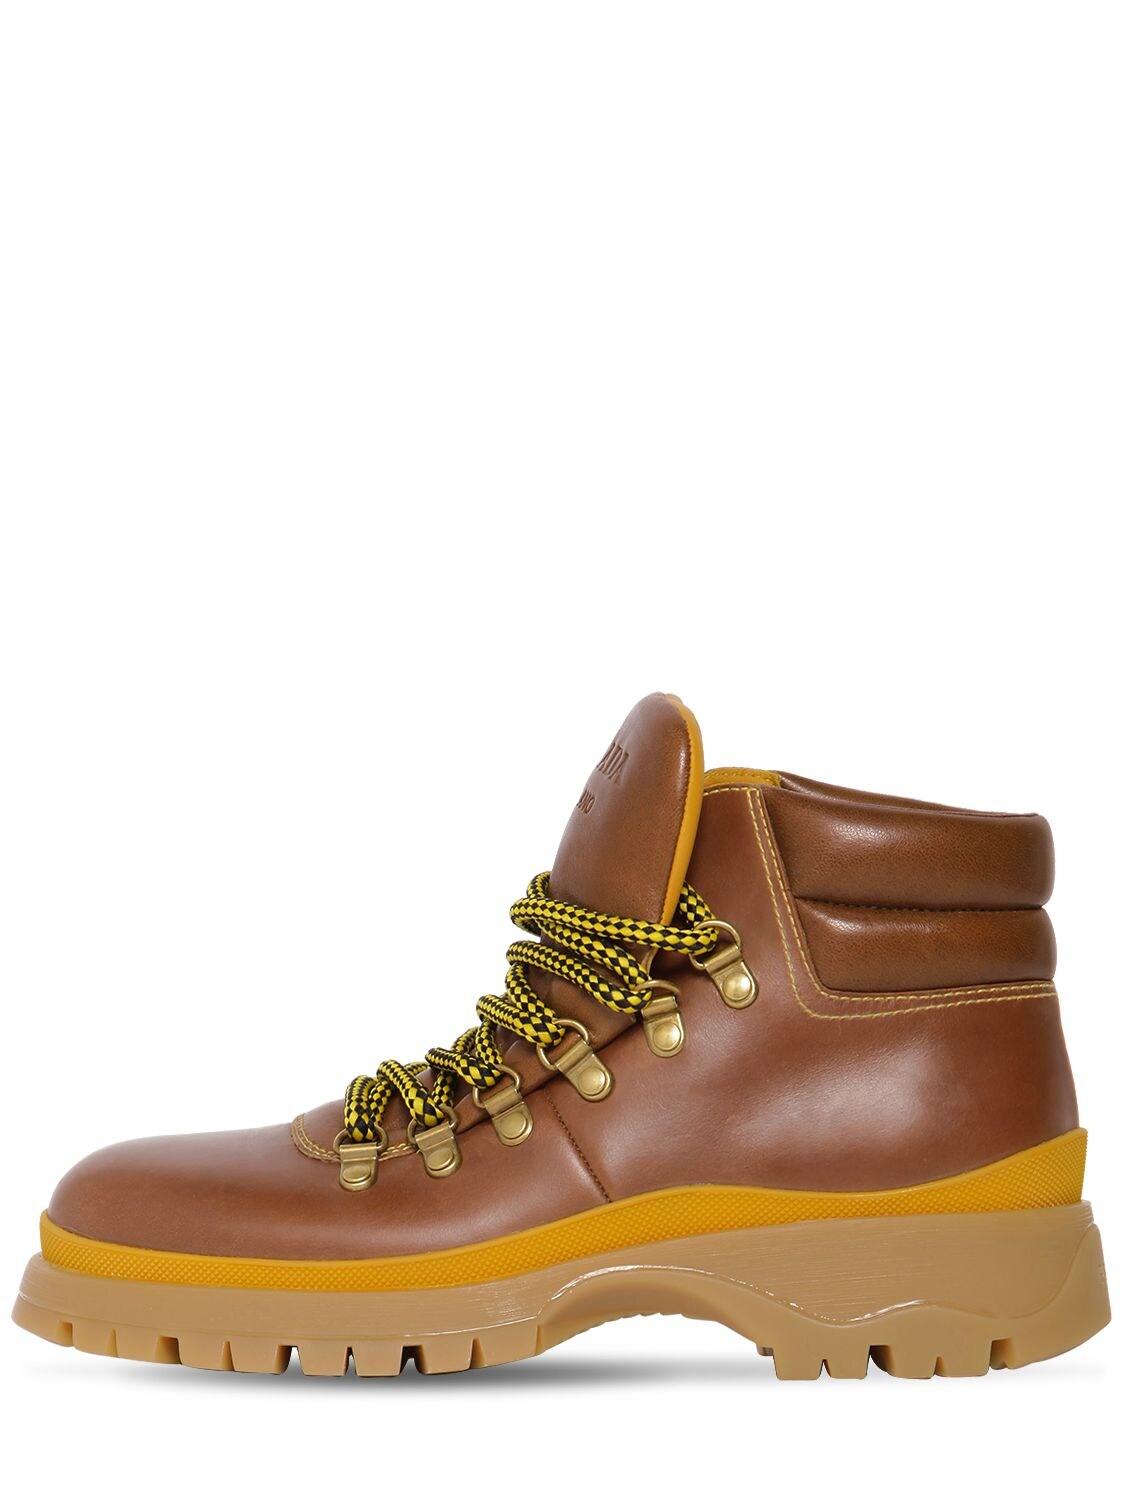 Prada 40mm Brixen Leather Hiking Boots in Tan (Brown) - Lyst